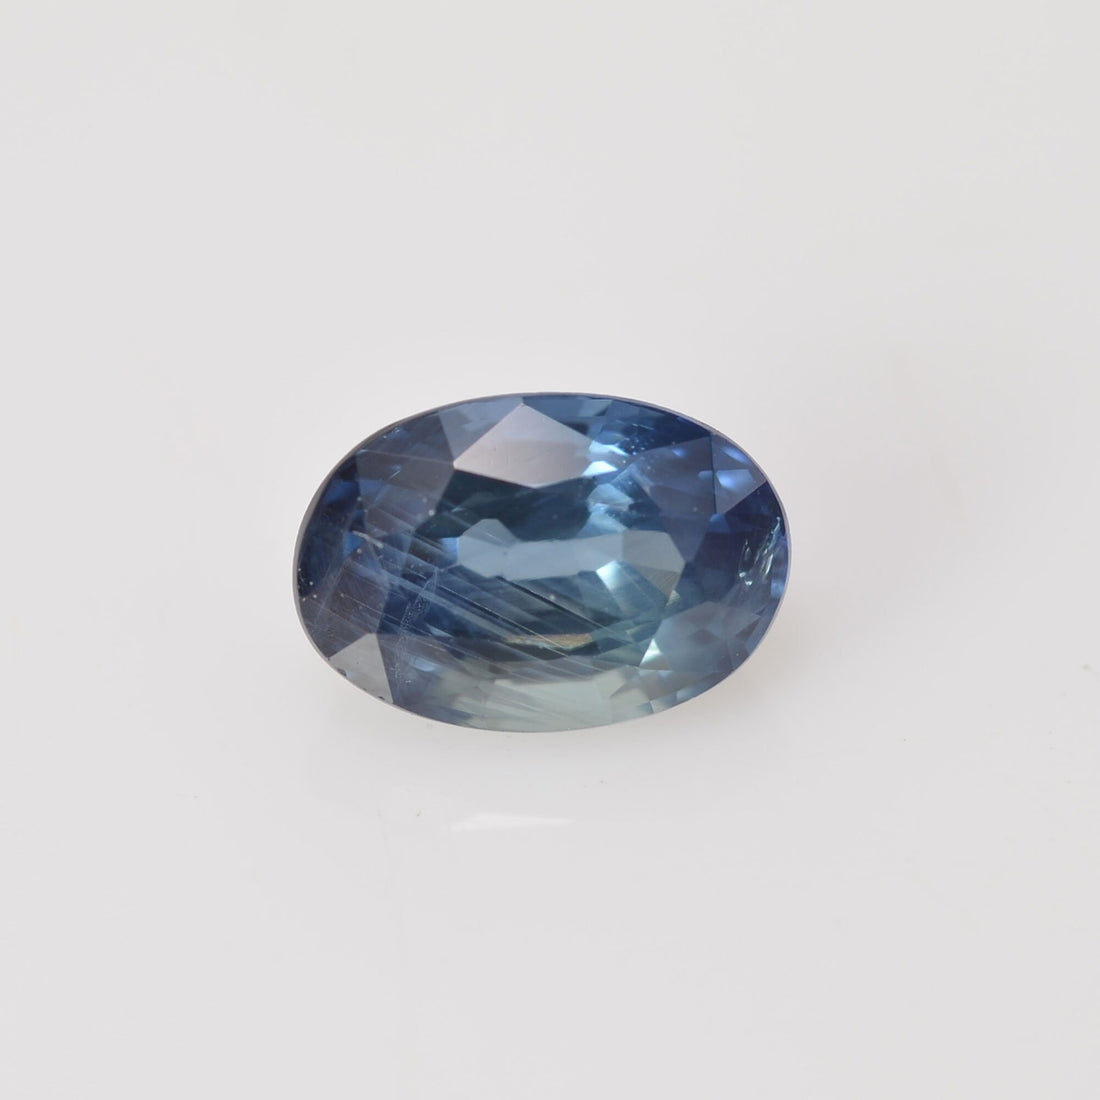 0.76 cts Natural Blue Green Teal Sapphire Loose Gemstone Oval Cut